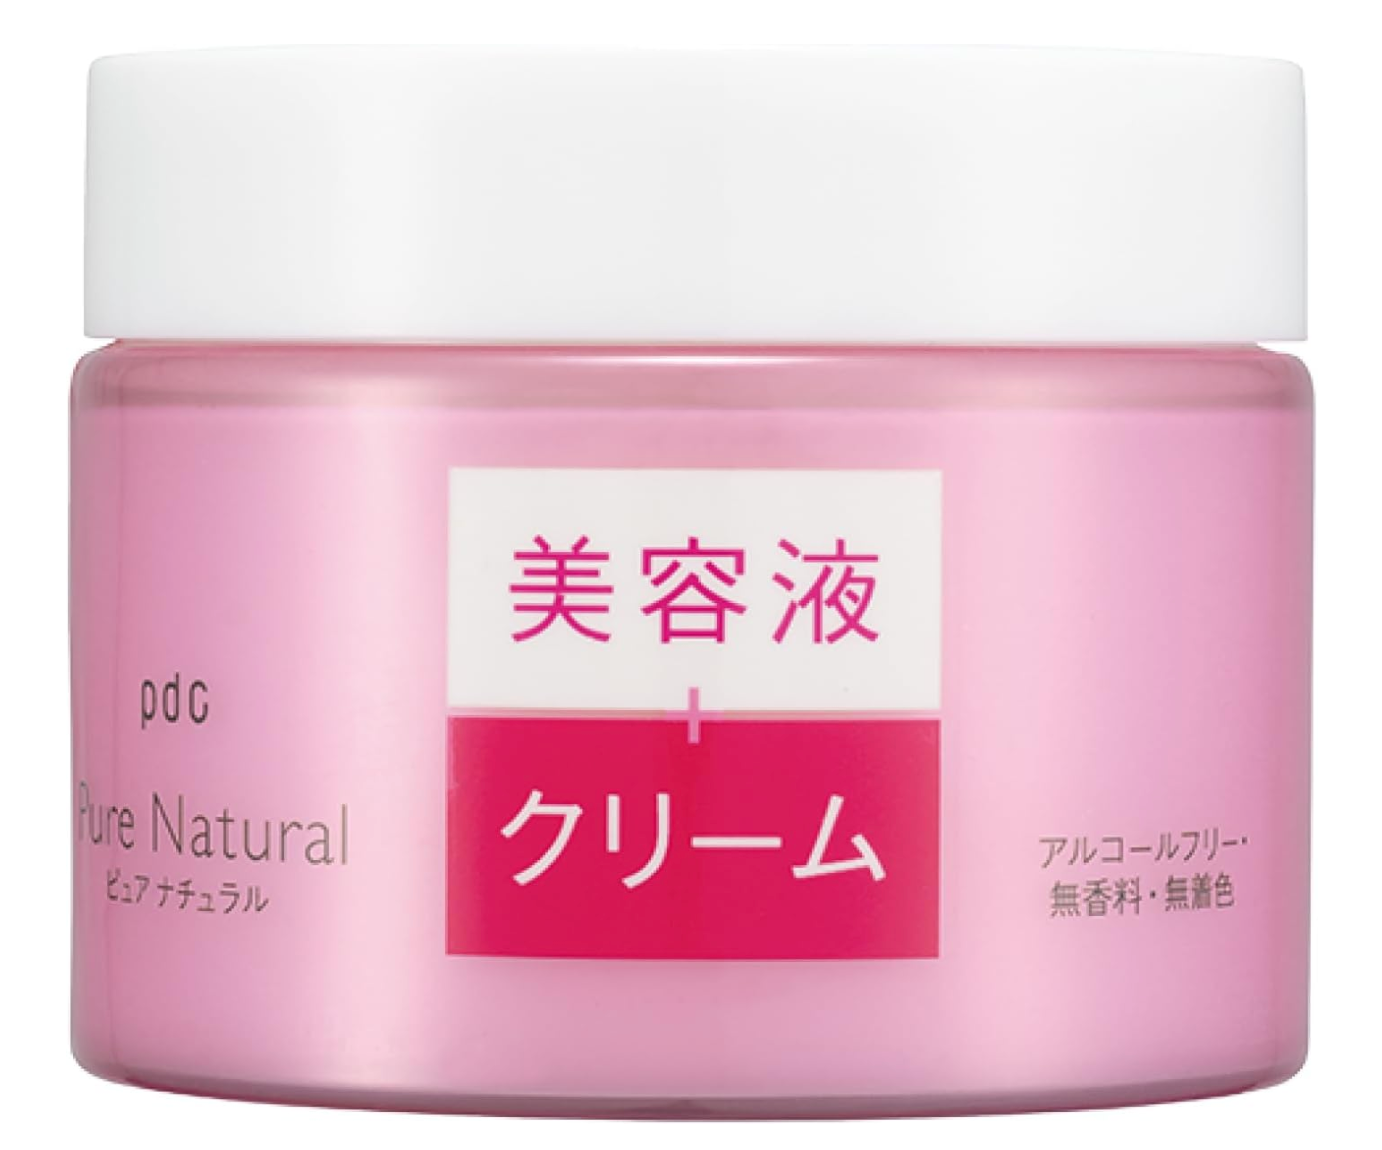 Pdc Pure Natural  Aging Care Cream With Collagen & Hyaluronic Acid 100g - Japanese Anti-Aging Care